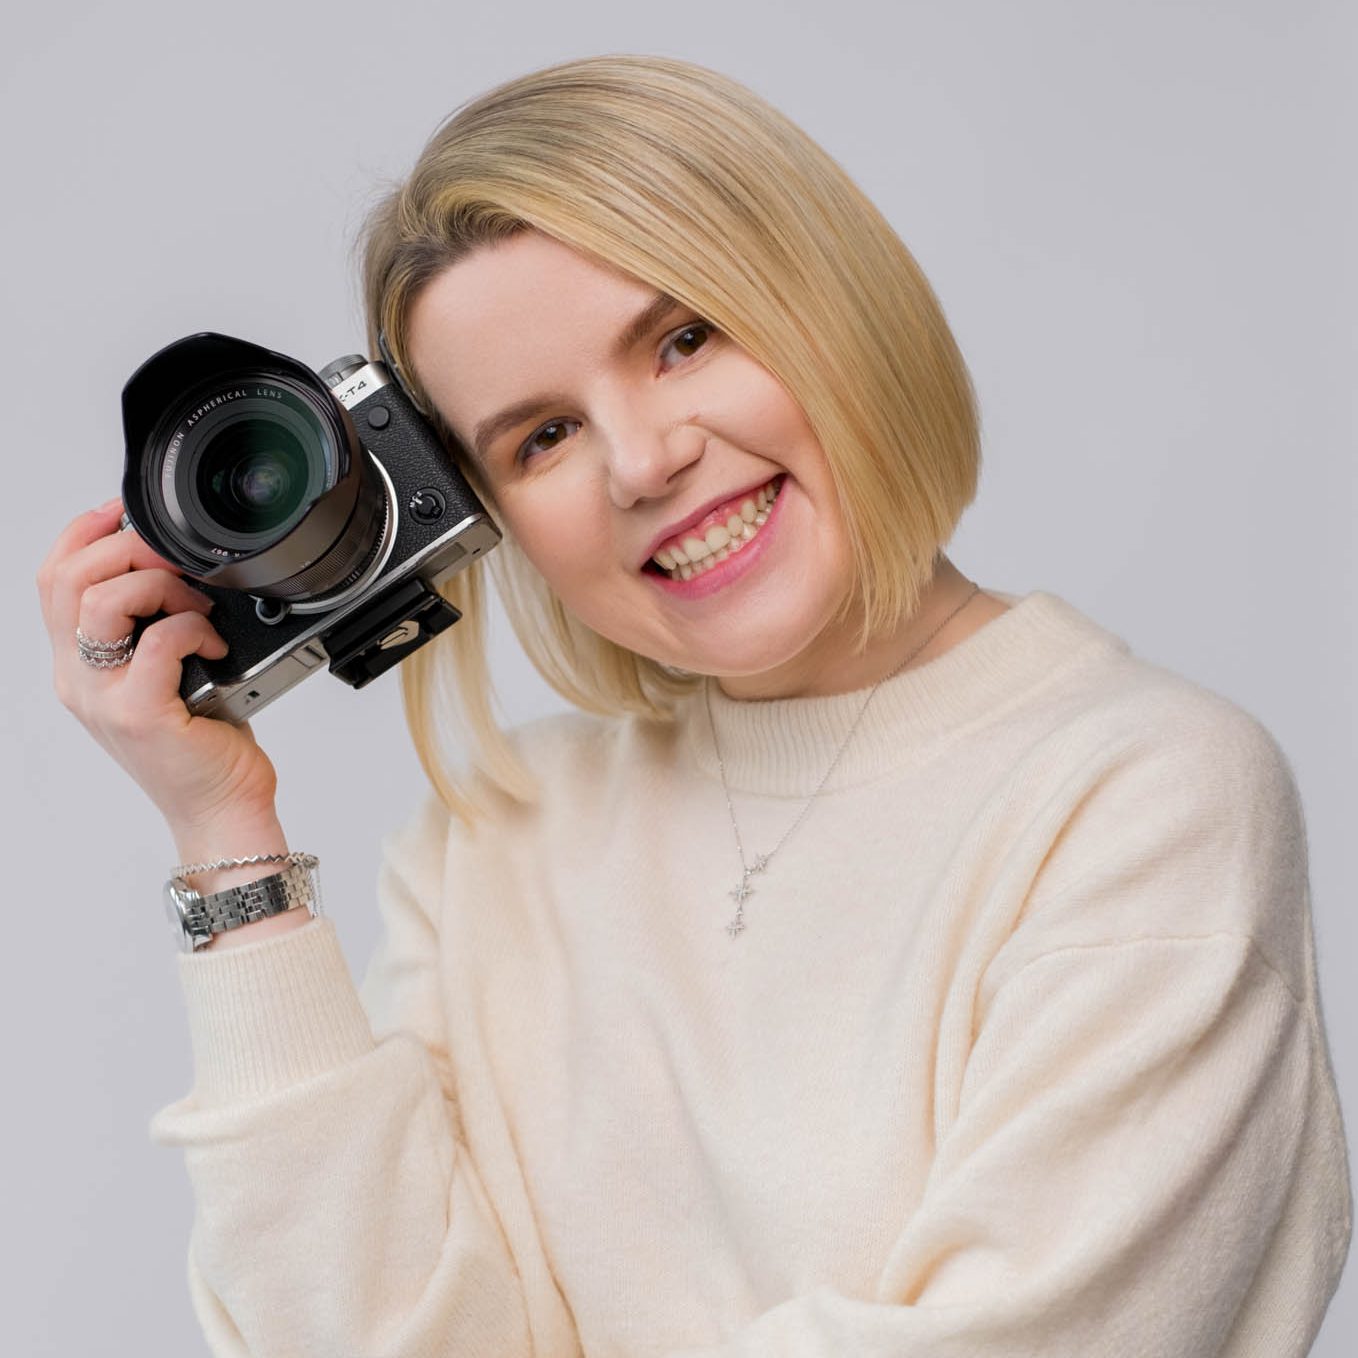 business headshot of a professional female photographer smiling